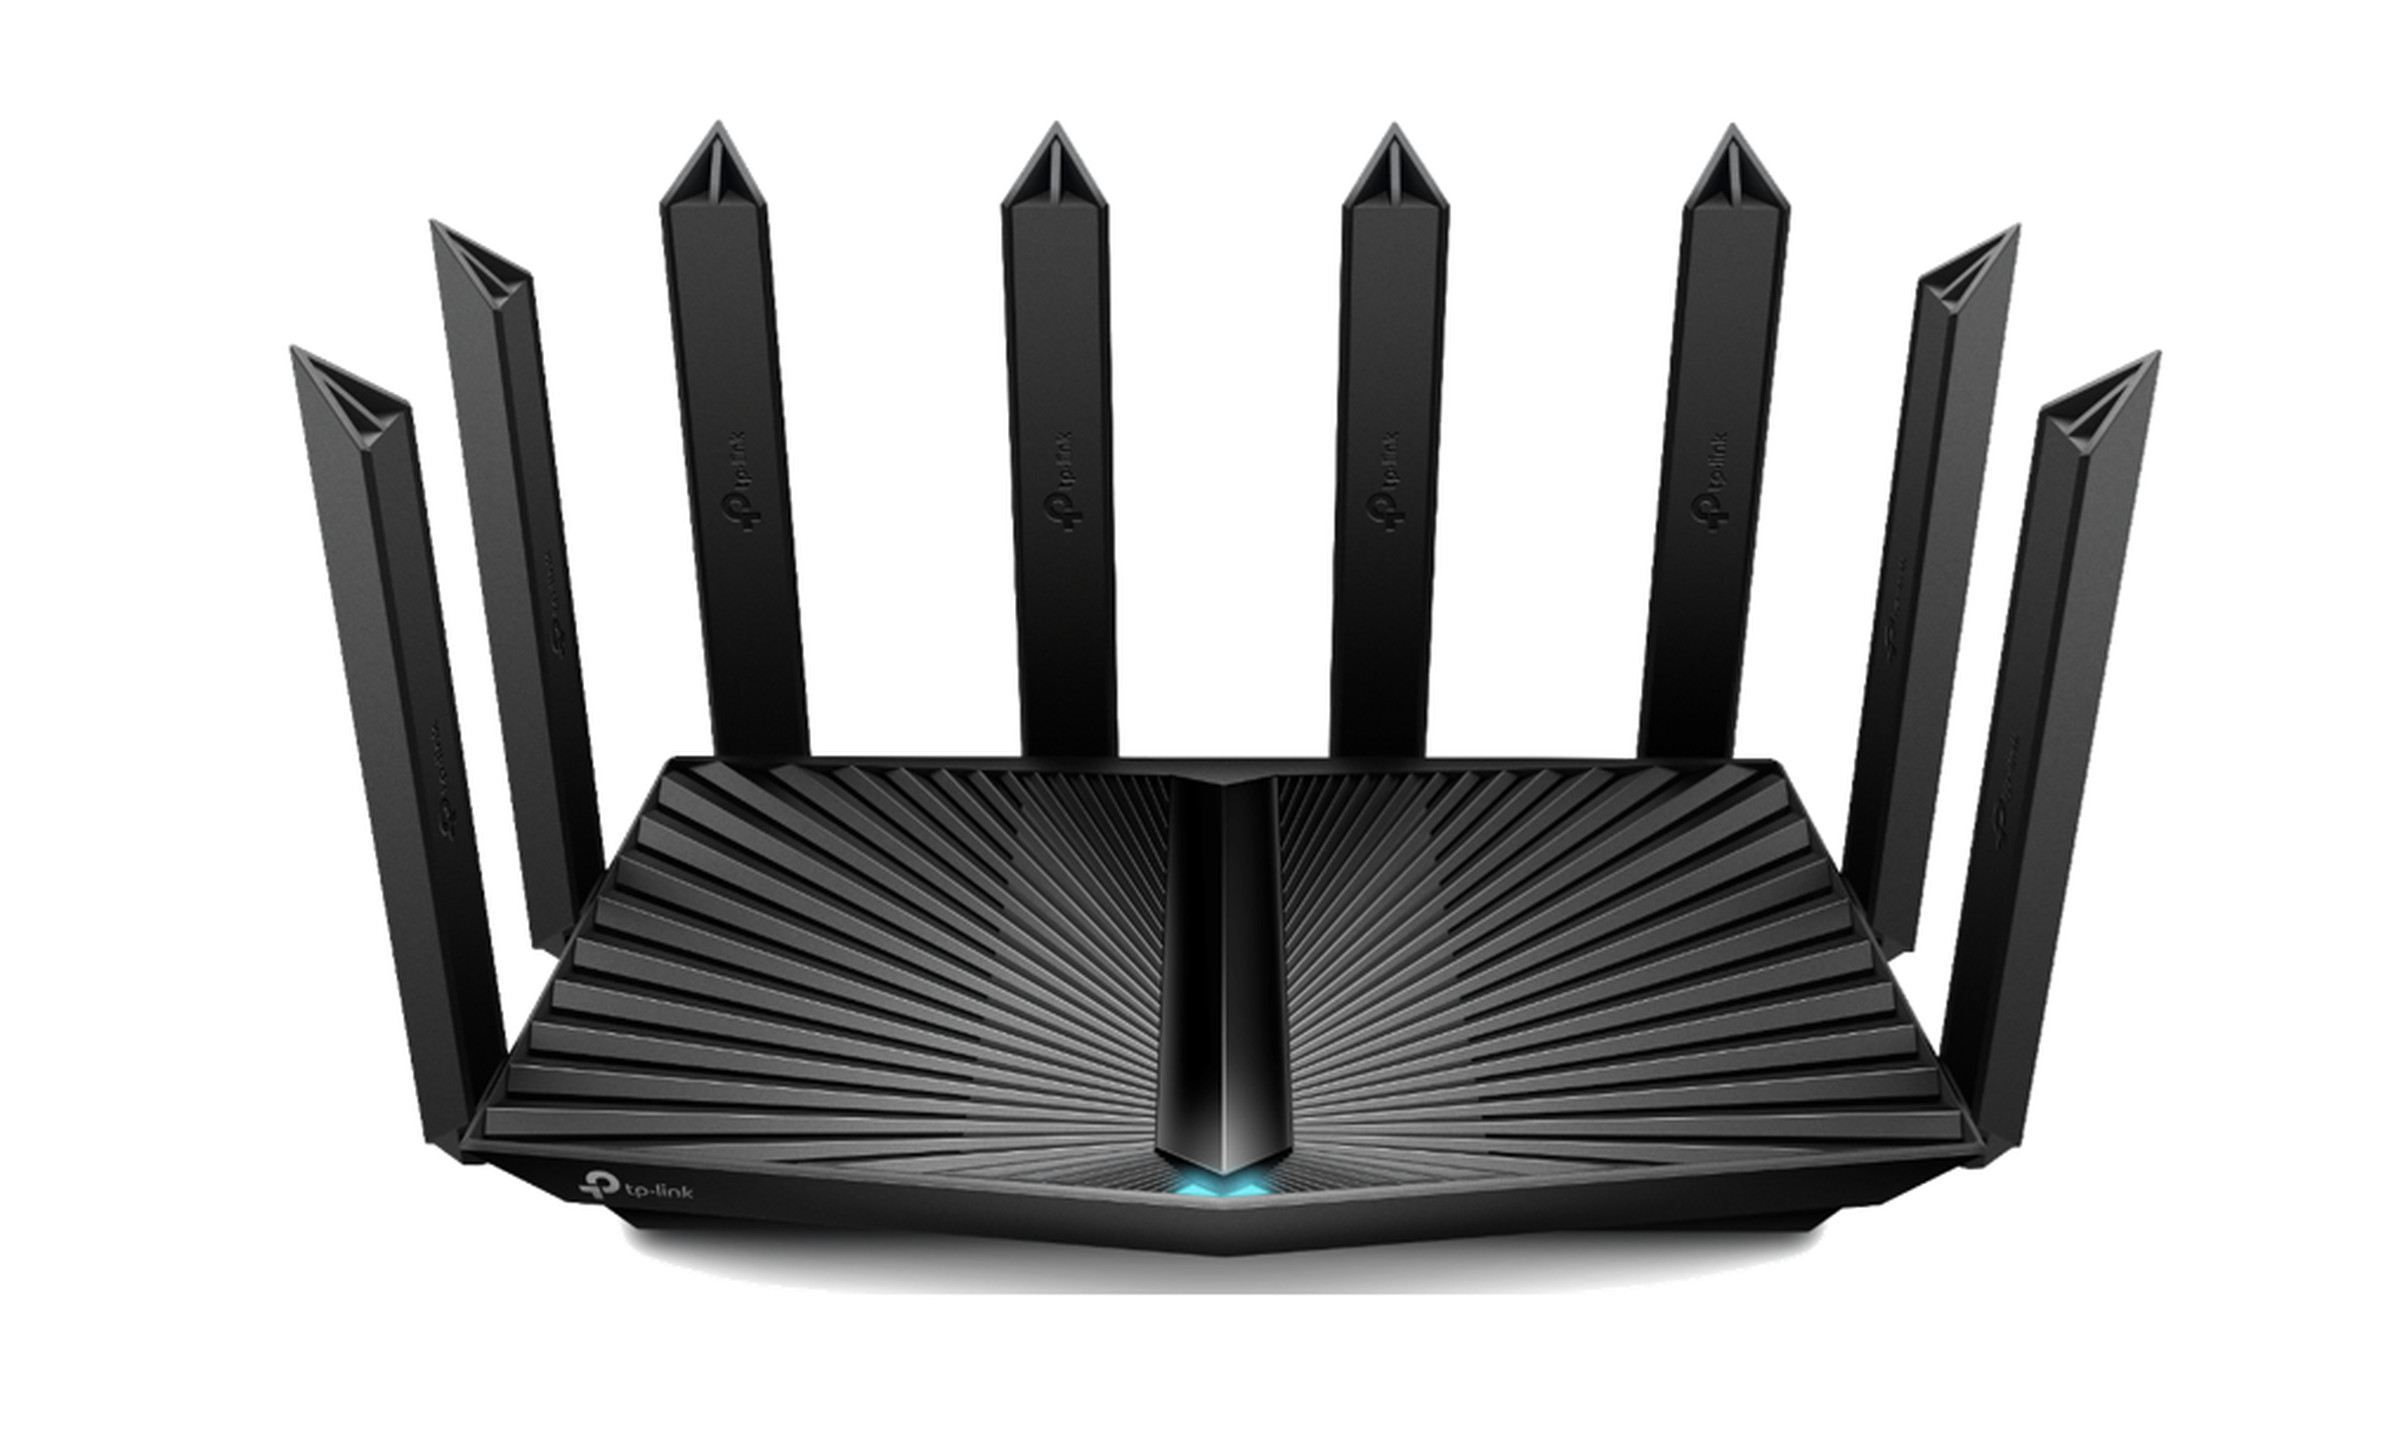 A new take on the spider router, TP-Link’s Archer AX90 is a tri-band Wi-Fi 6 router claiming speeds up to 6.6 Gbps. It comes out in April for $300.